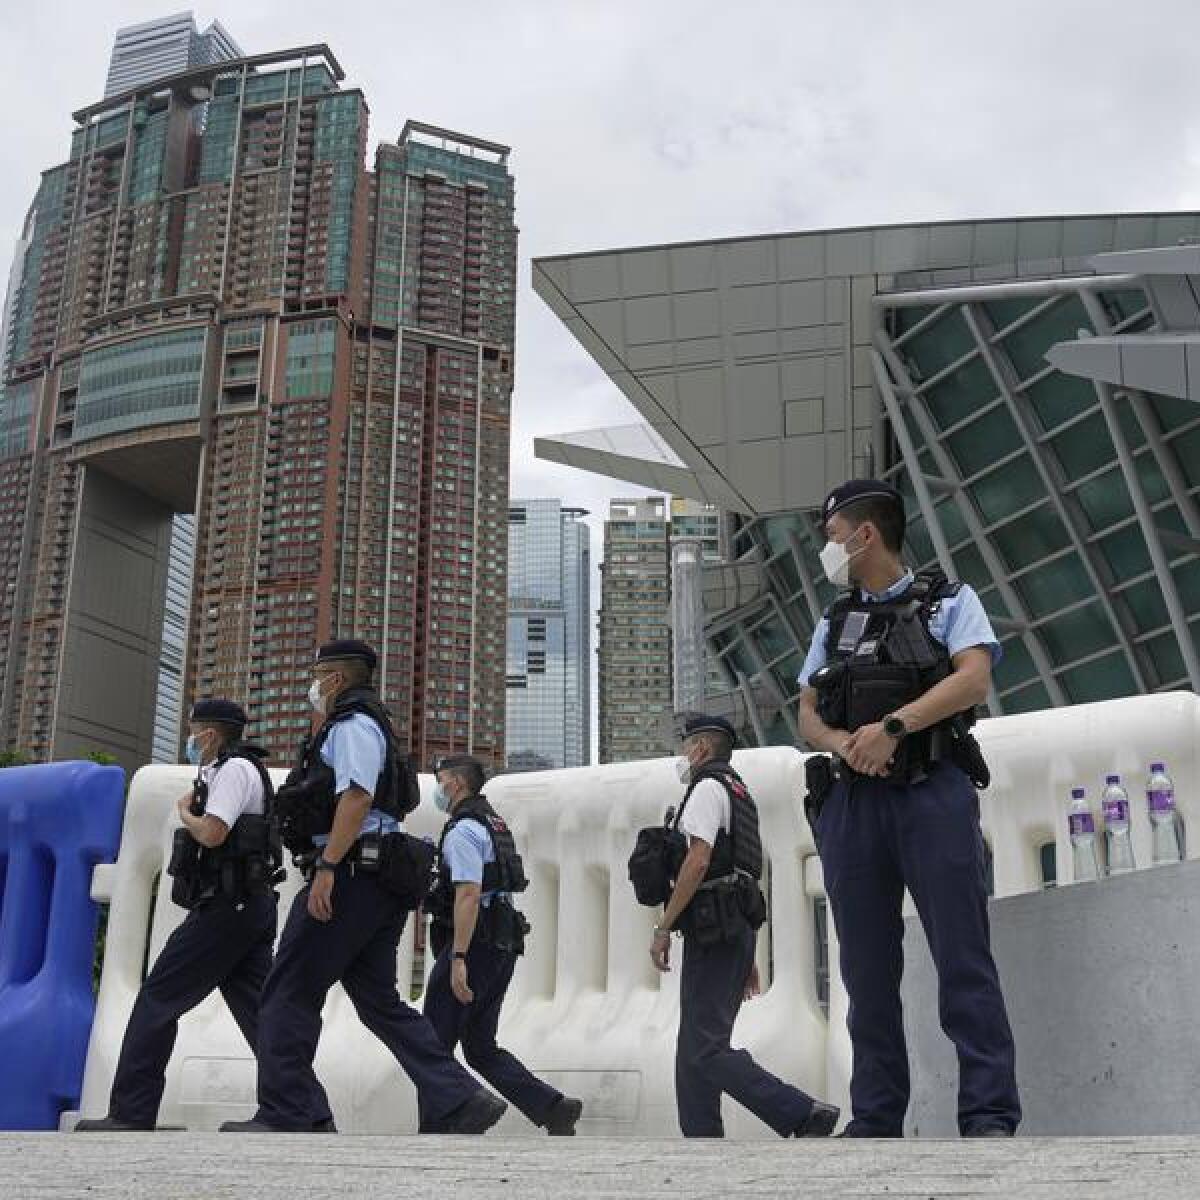 Security is tight in Hong Kong for Xi Jinping's arrival.